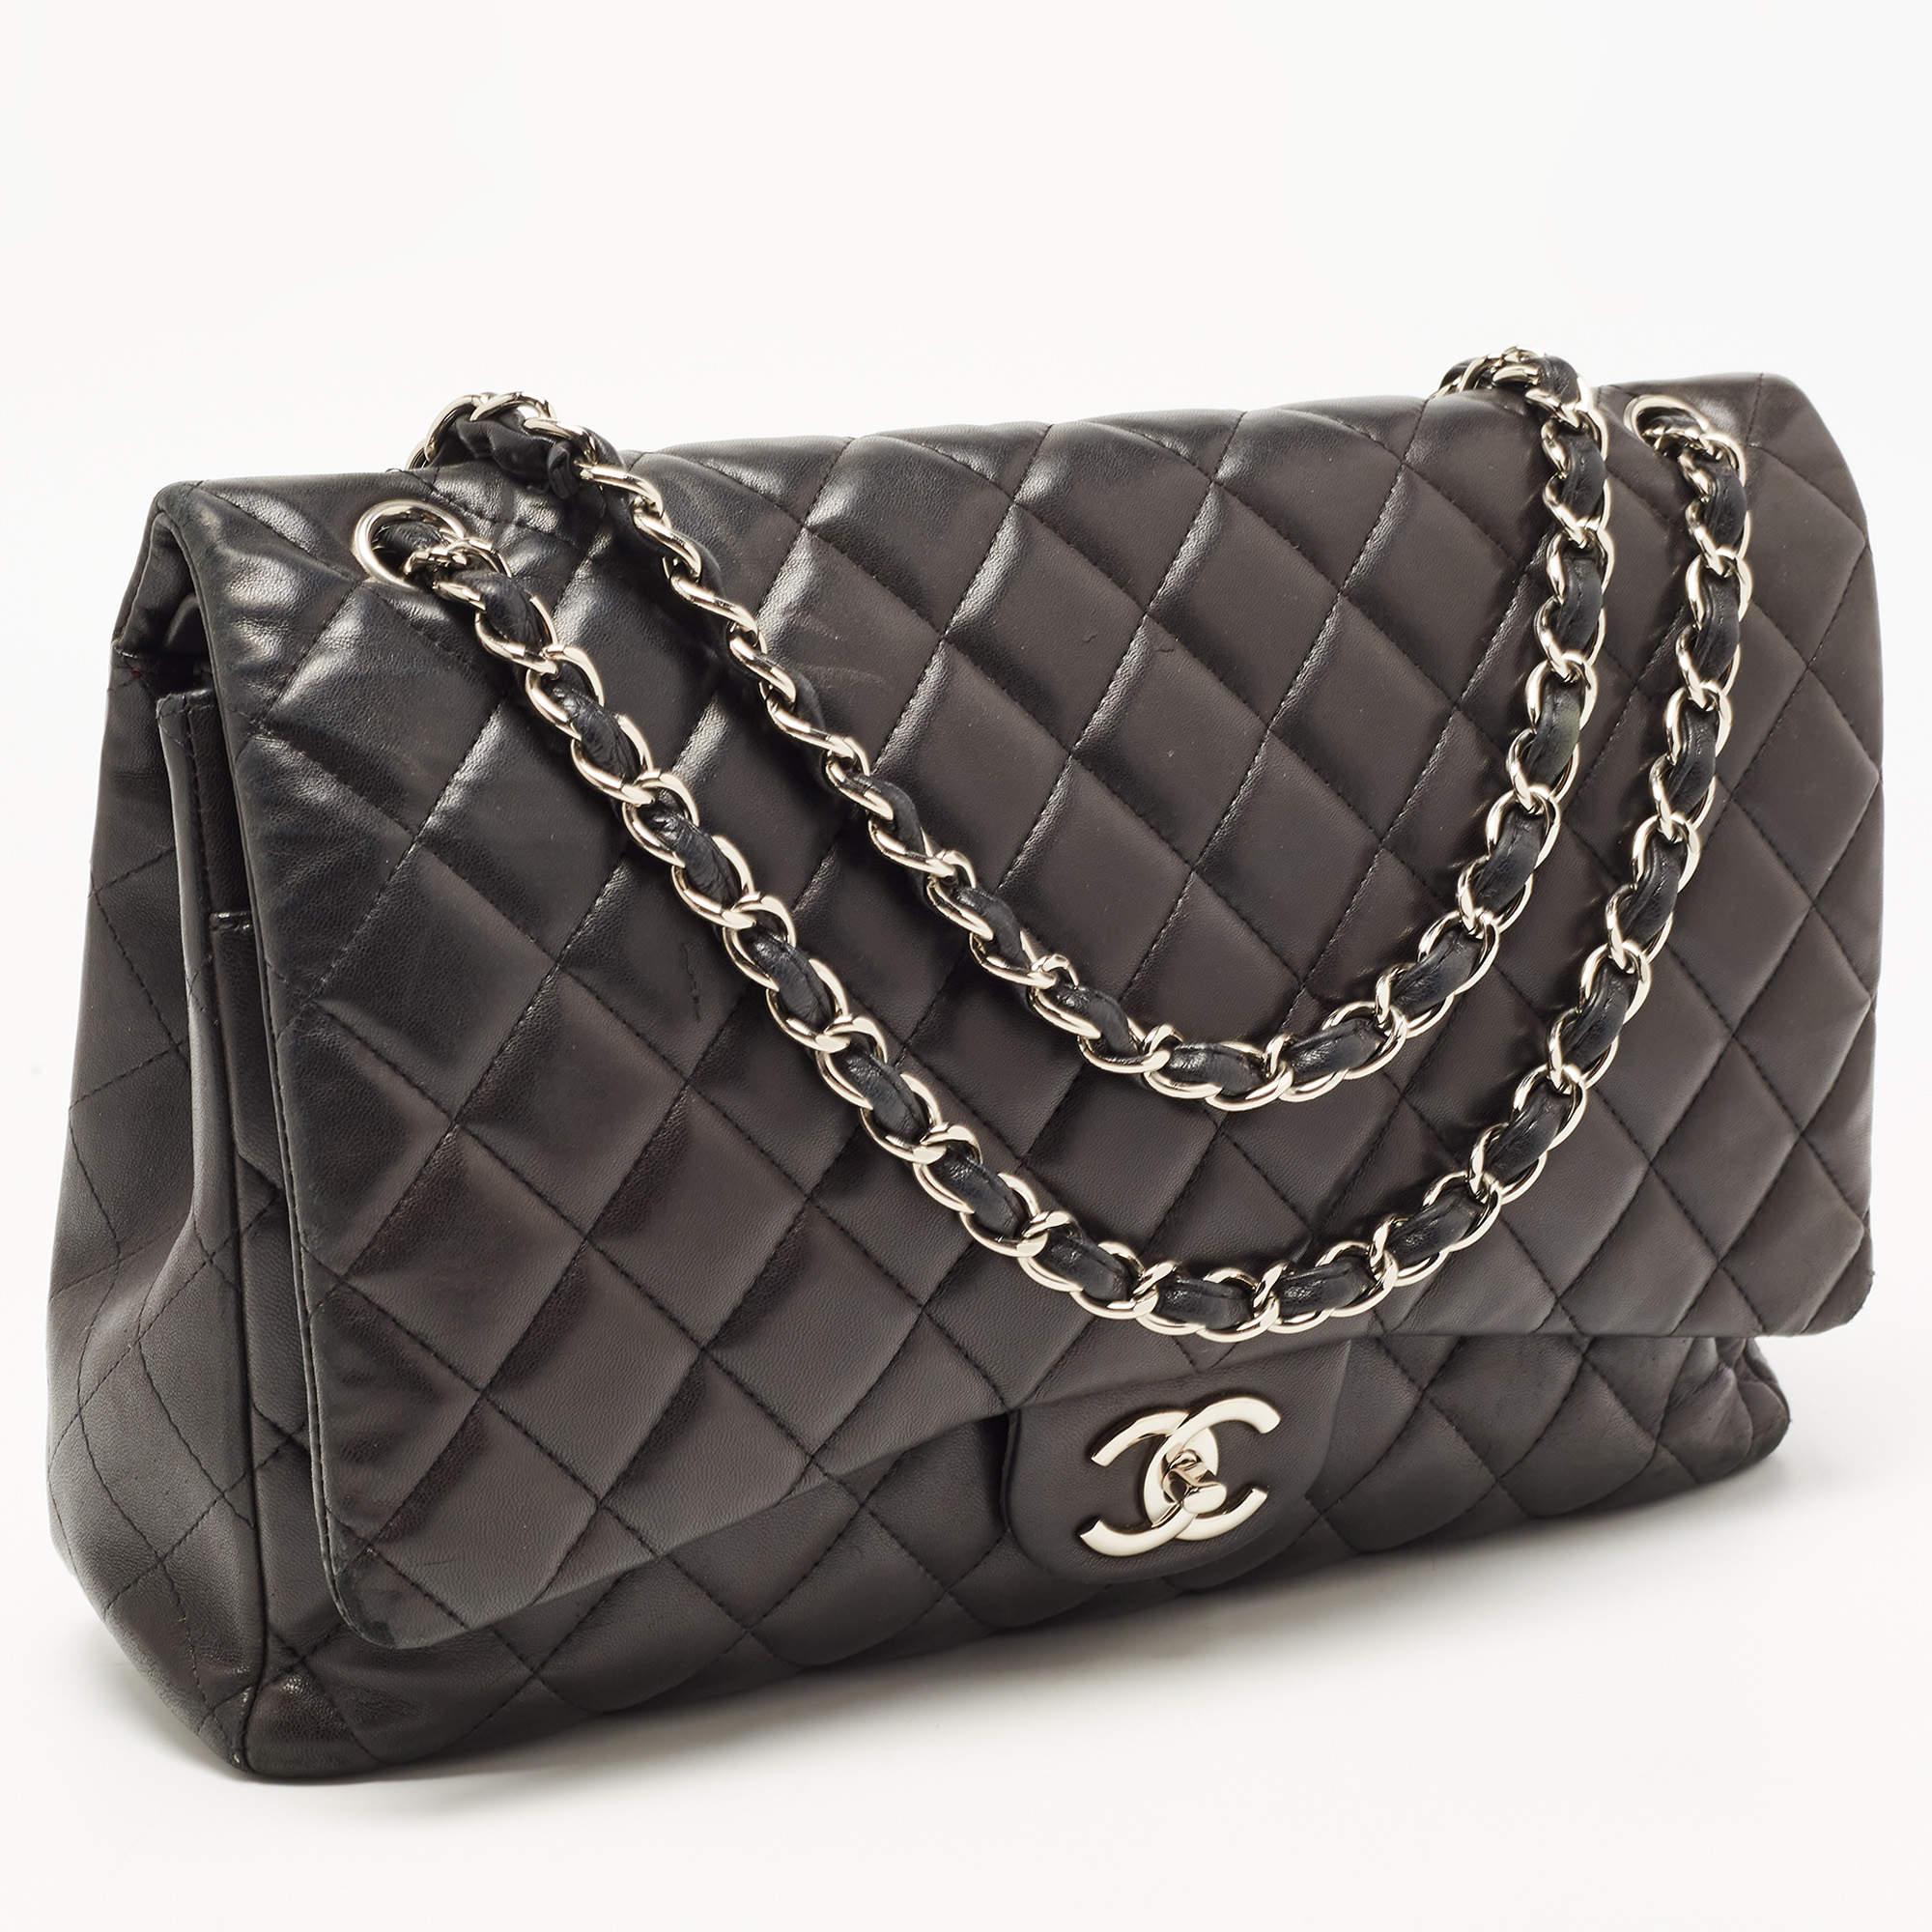 Chanel Black Quilted Leather Maxi Classic Double Flap Bag In Good Condition For Sale In Dubai, Al Qouz 2